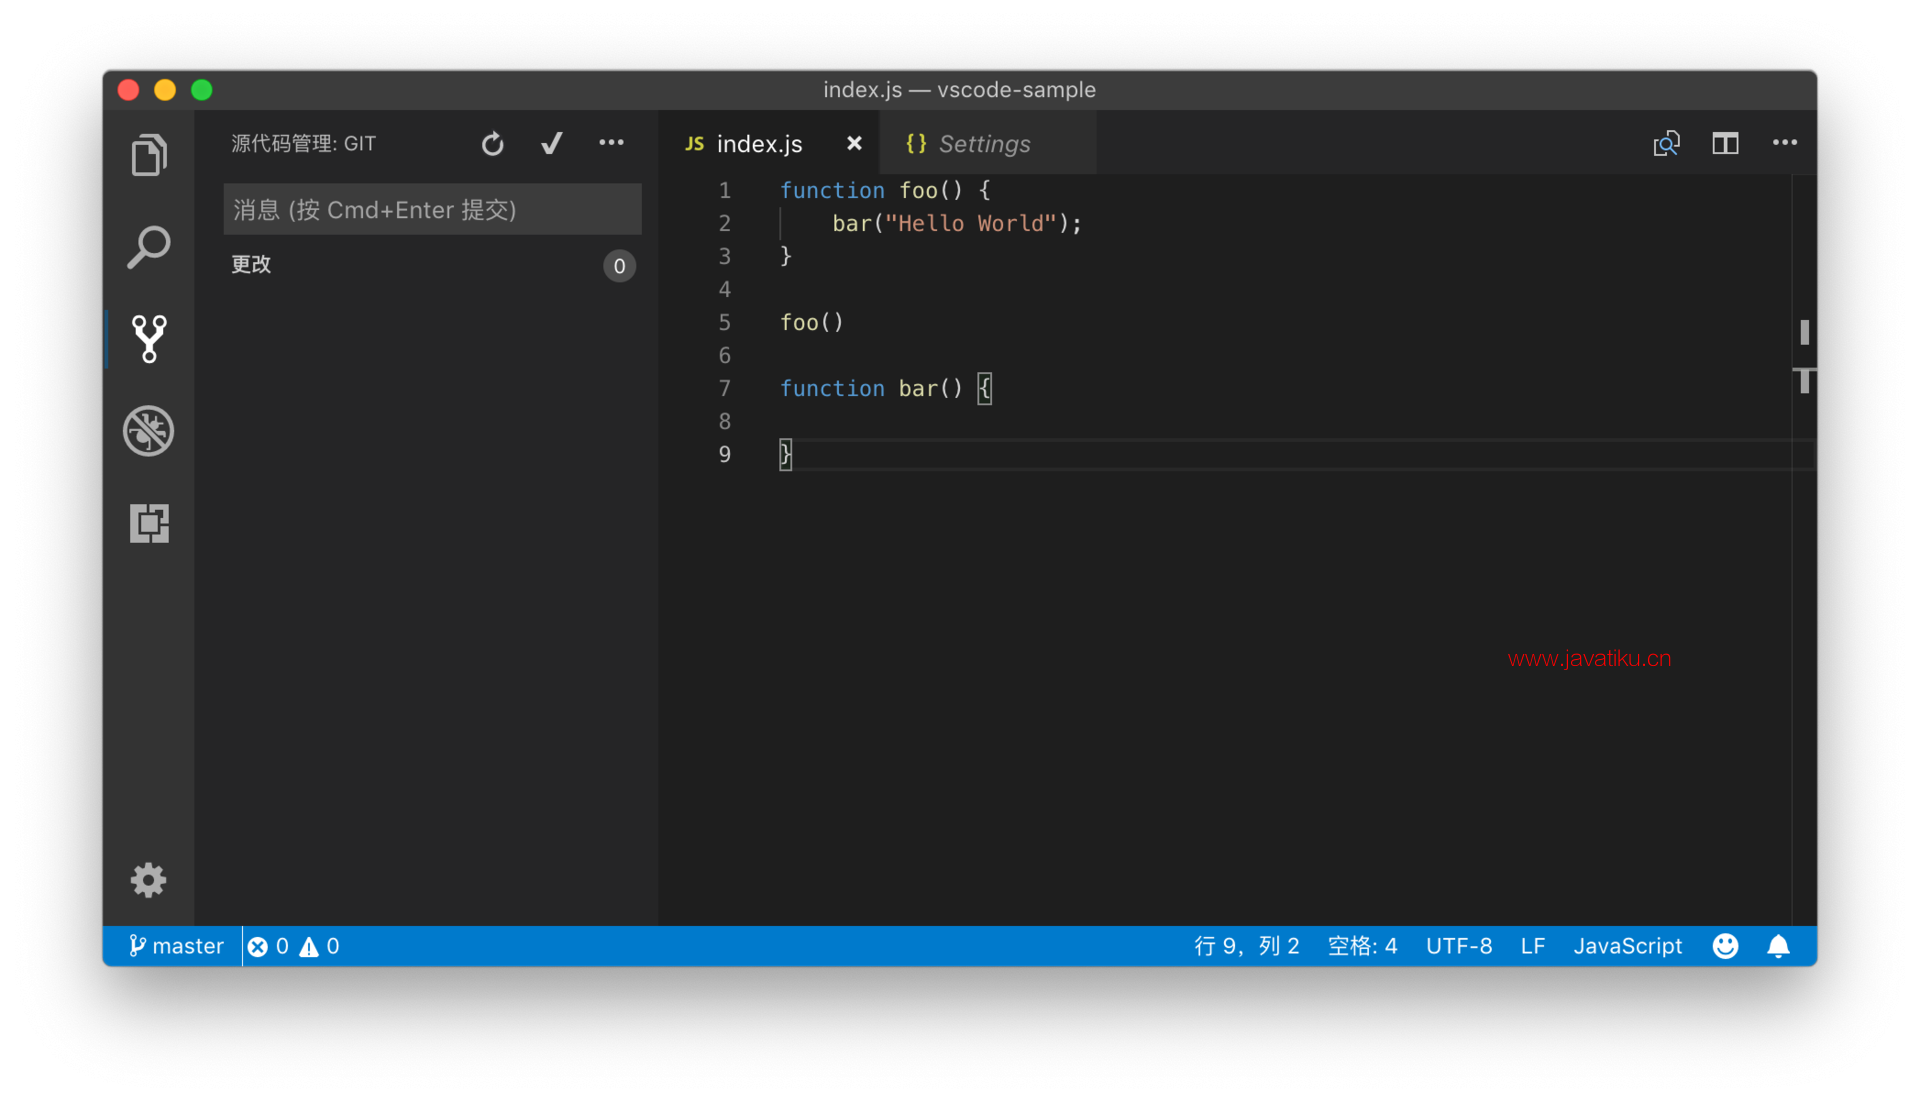 vscode-versioning-view-01.png